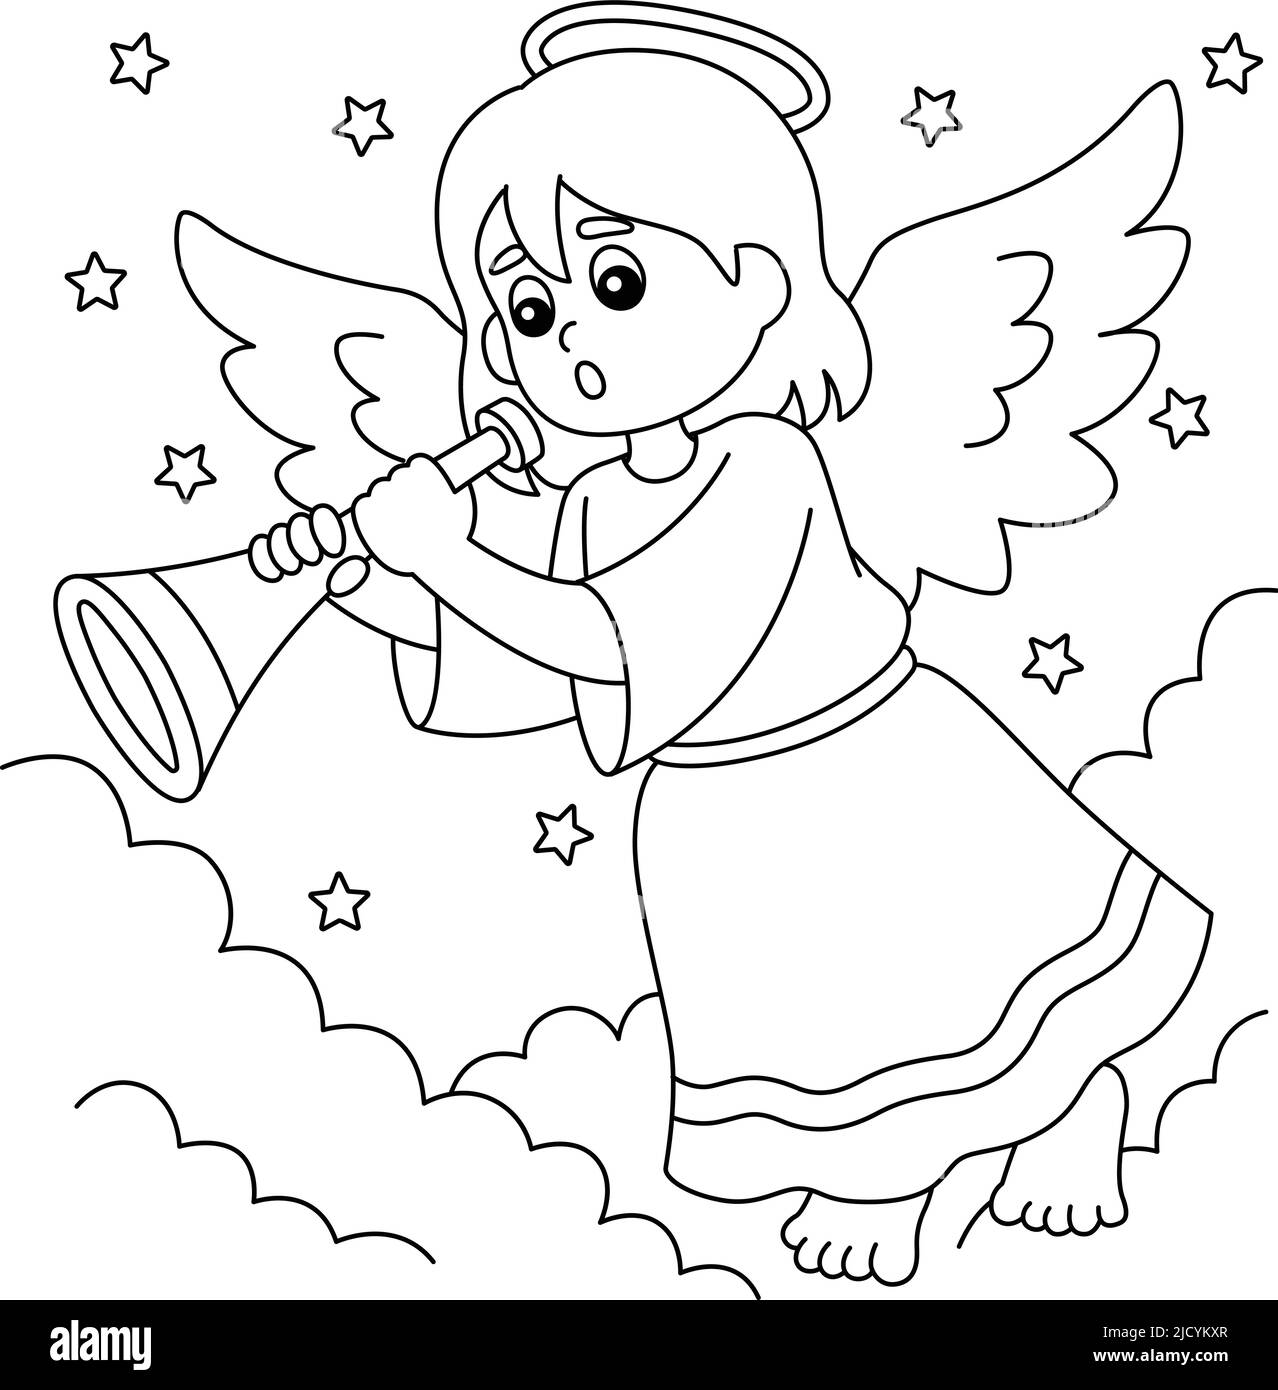 Christmas Angel Coloring Page for Kids Stock Vector